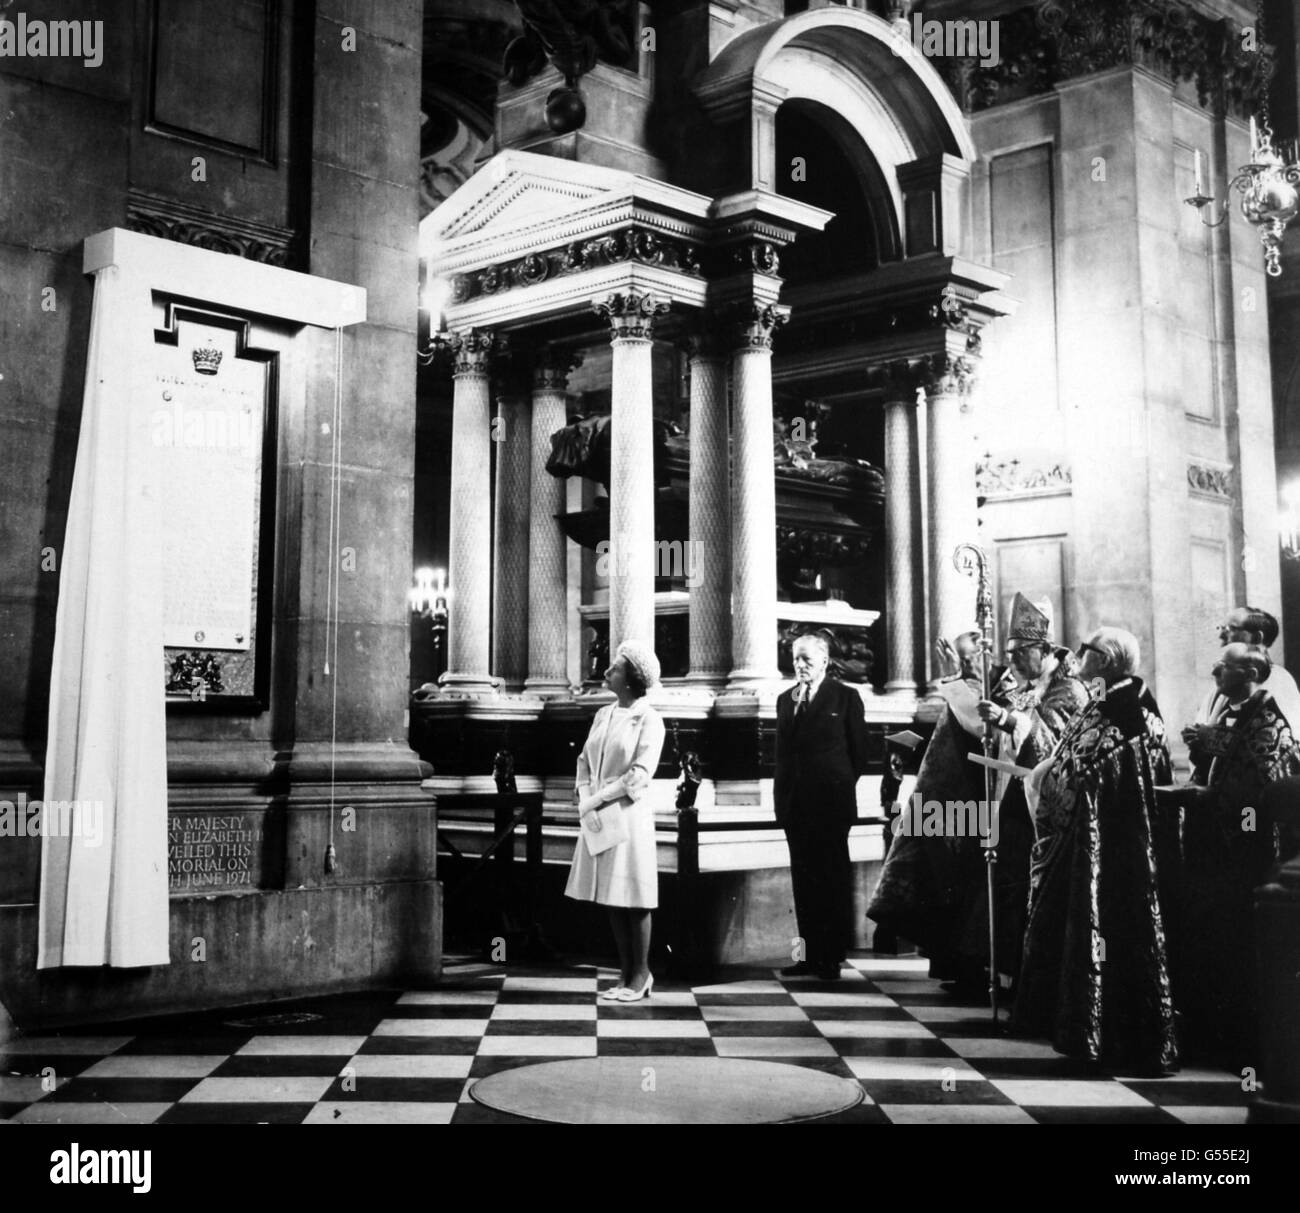 Queen Elizabeth II views the tablet after unveiling the memorial commemorating the 200 years service of the former Indian Army in St Paul's Cathedral. Watching are field Marshall Sir Claude Auchinleck, left; the Bishop of London, Dr Robert Stopford; and the Dean of St Paul's, the Very Rev. Martin Sullivan. Stock Photo